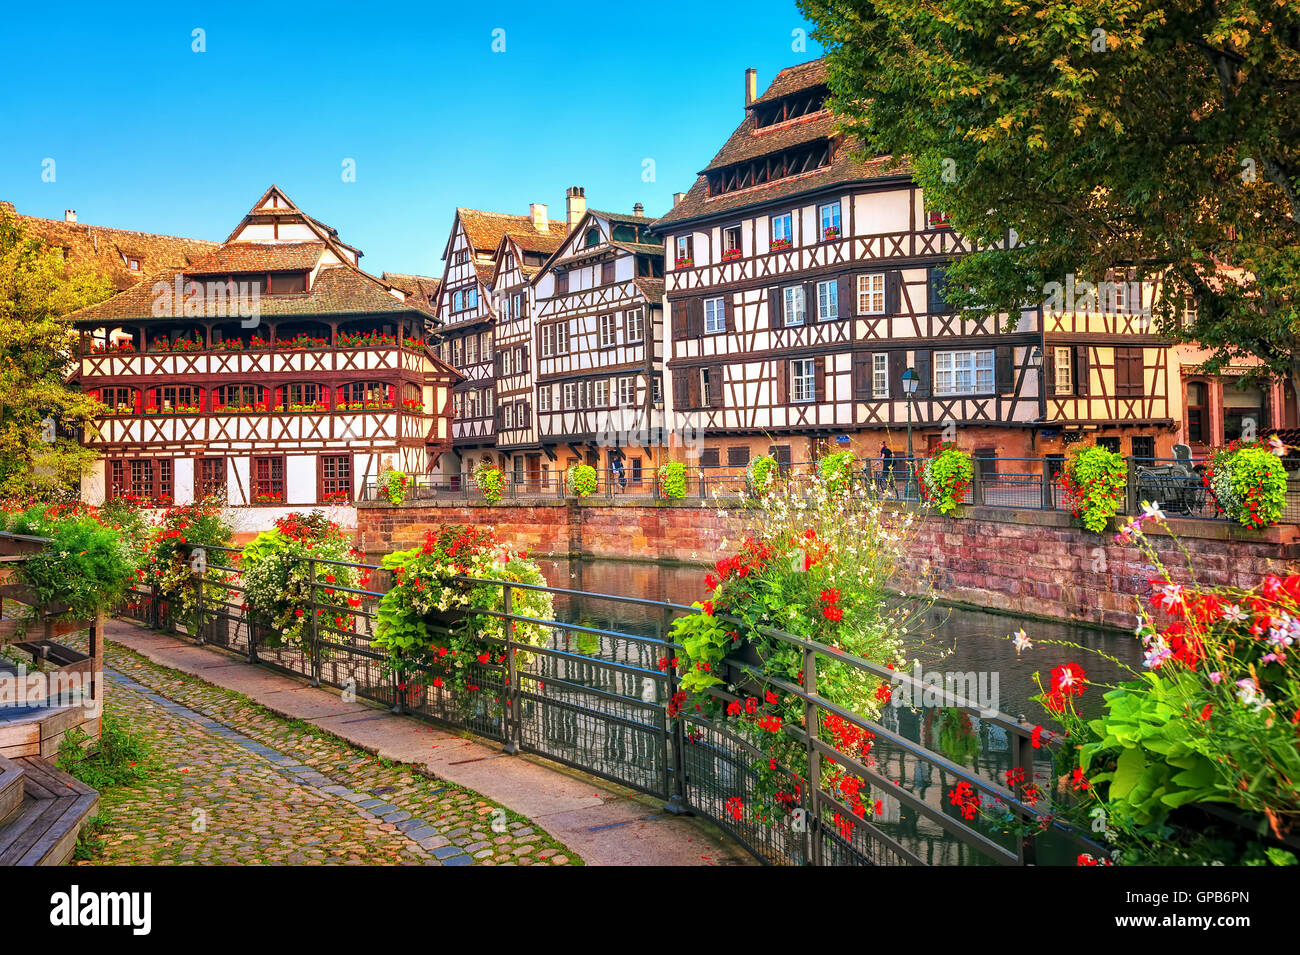 Traditional half-timbered houses in La Petite France, Strasbourg, France Stock Photo